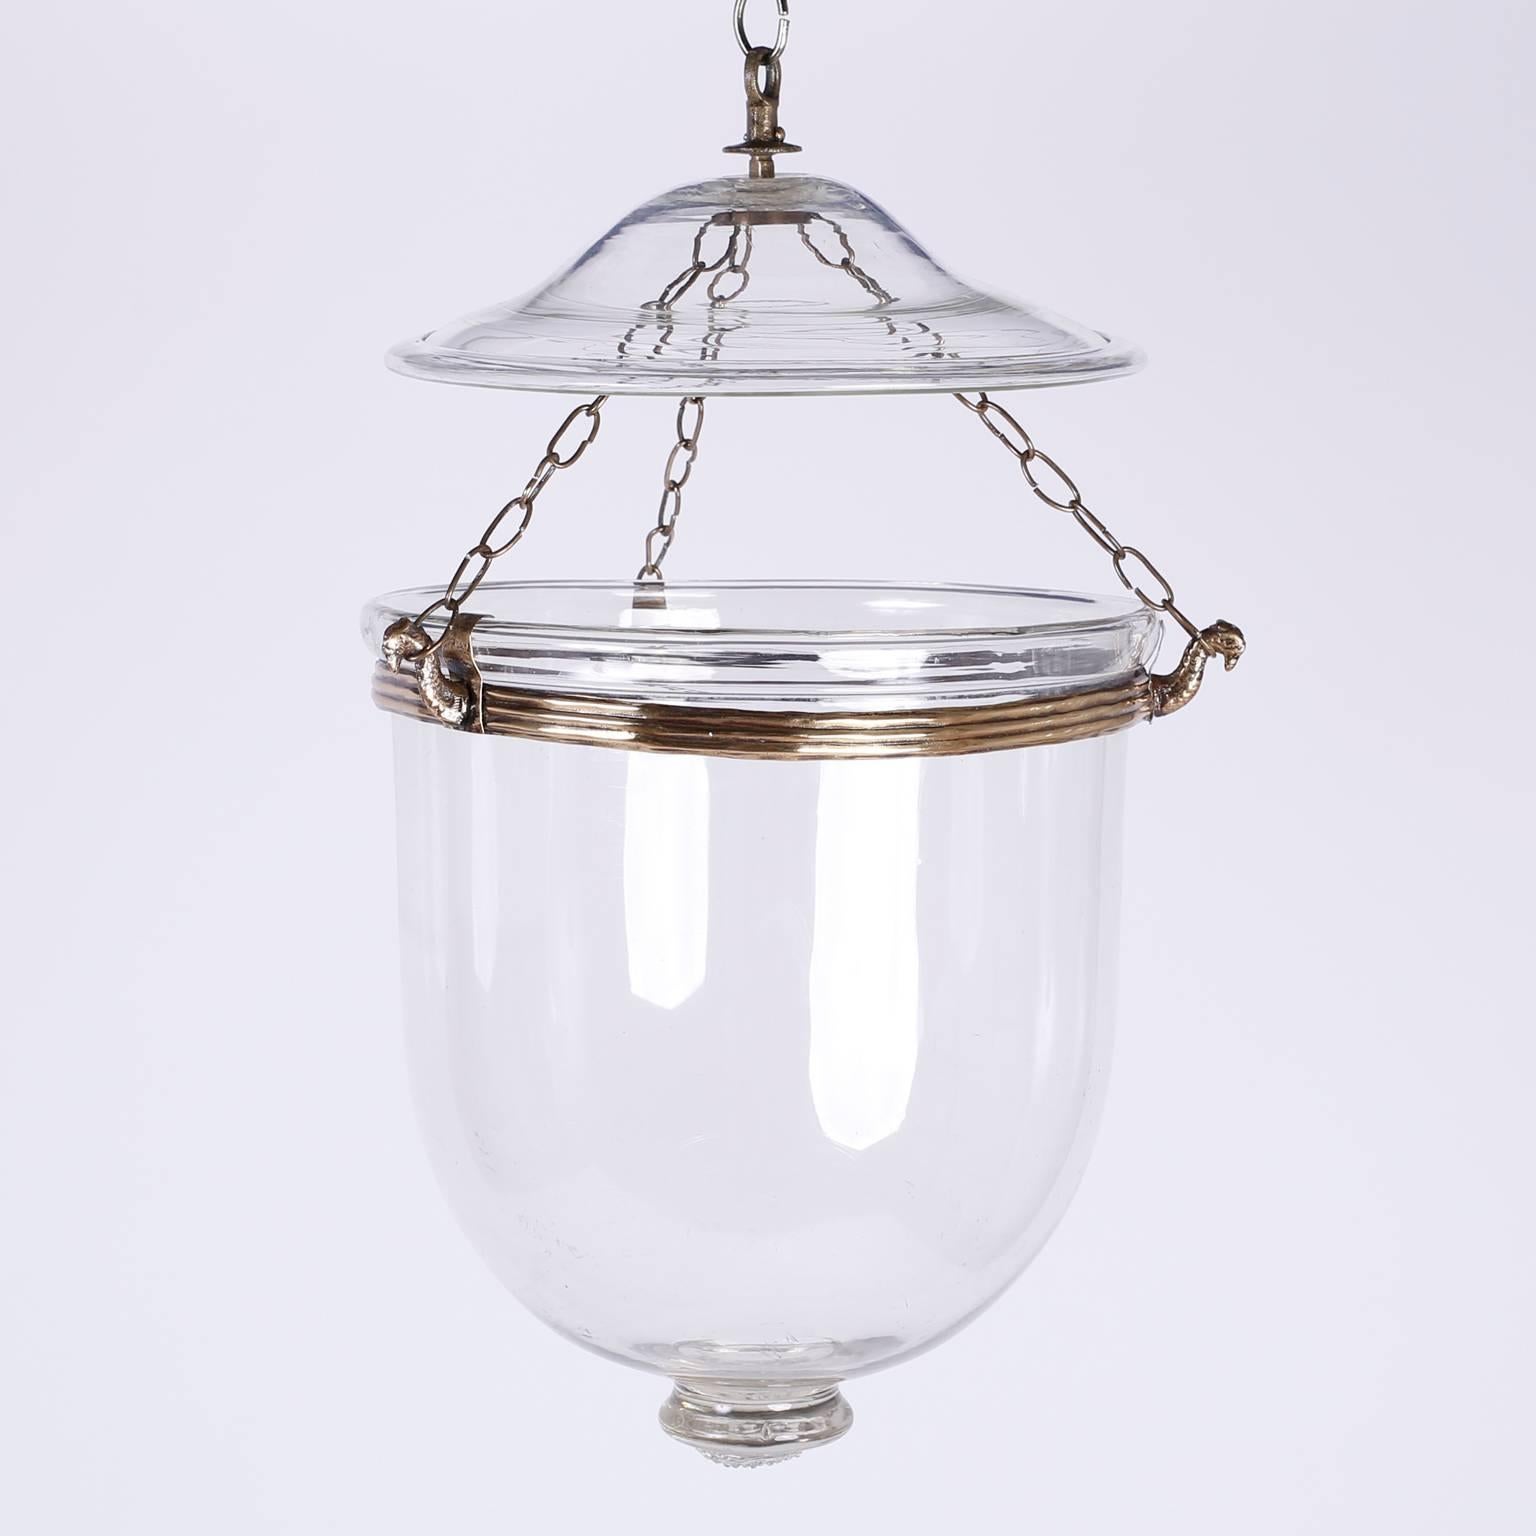 Pair of 19th century Georgian style bell jar lights or pendants with smoke bells in classic form and featuring animal head chain hooks and handblown bell shades. Ex-collection of the late E. Charles Beyer, head of English and French furniture,